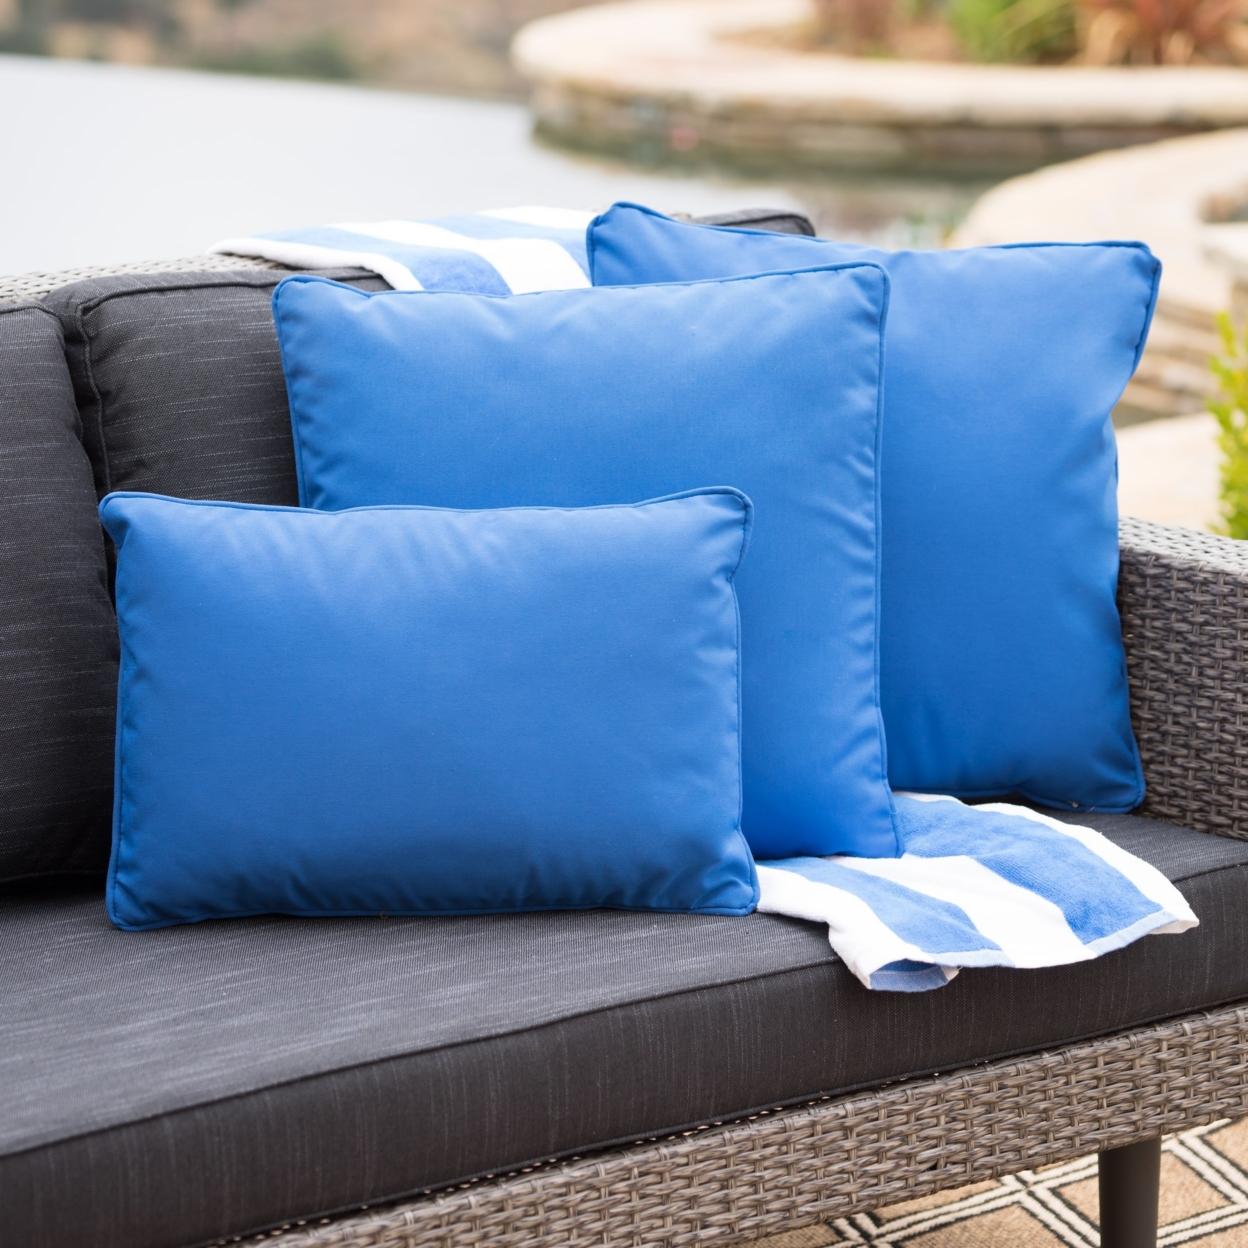 Corona Outdoor Patio Water Resistant Pillow Sets - Teal, Set Of 4